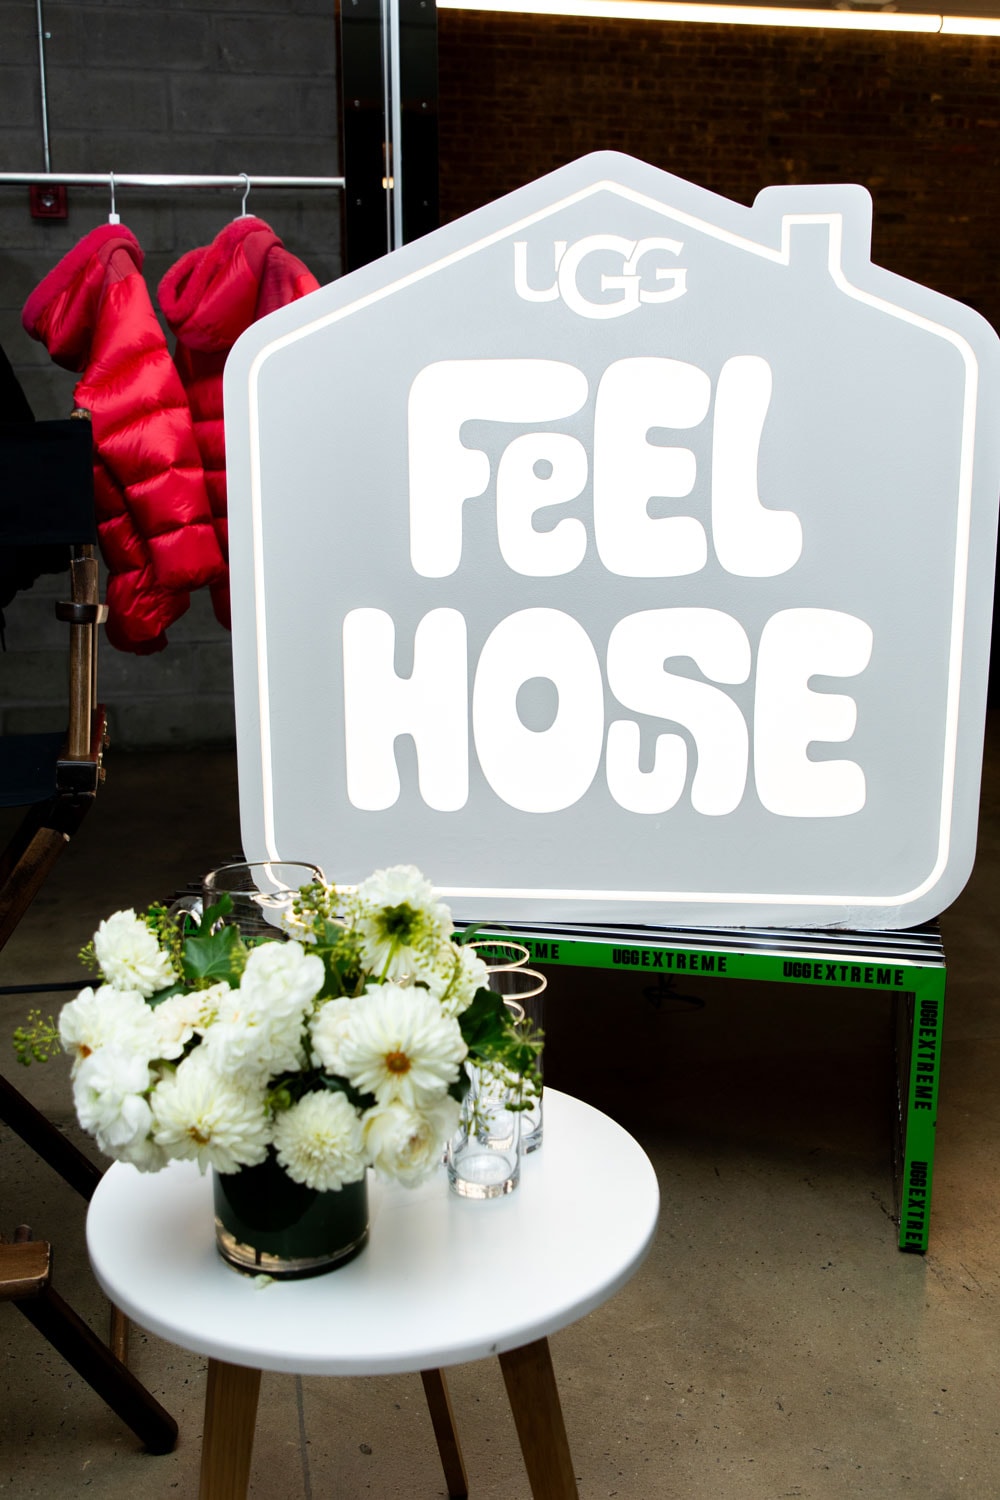 ugg feel house hbx new york city panel mental health resources fashion inclusive environment discussion lower east side chinatown